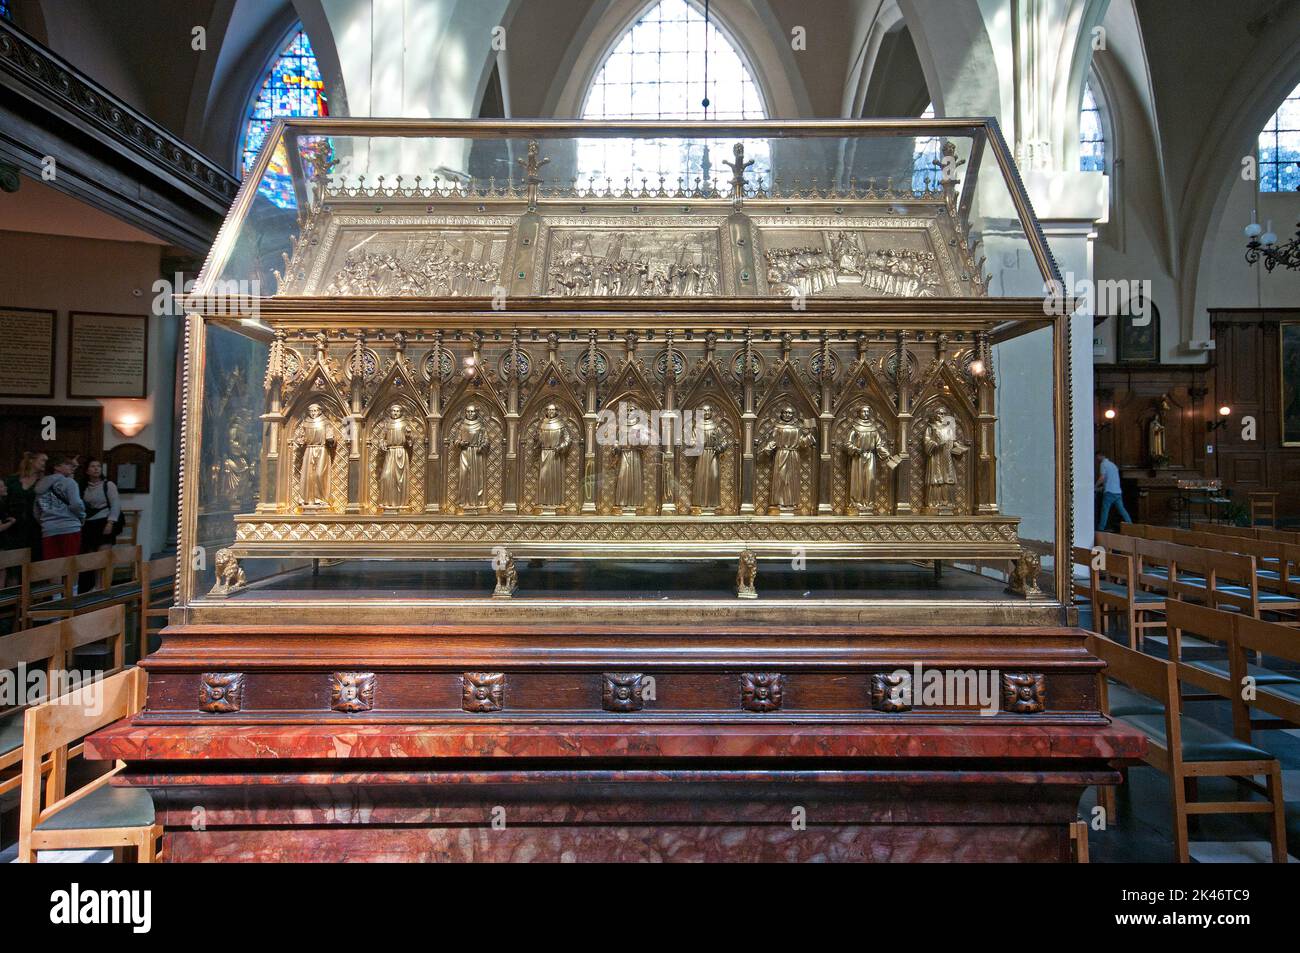 Historic gilded reliquary with the relics of Martyrs of Gorkum, Saint Nicholas church, Brussels, Belgium Stock Photo